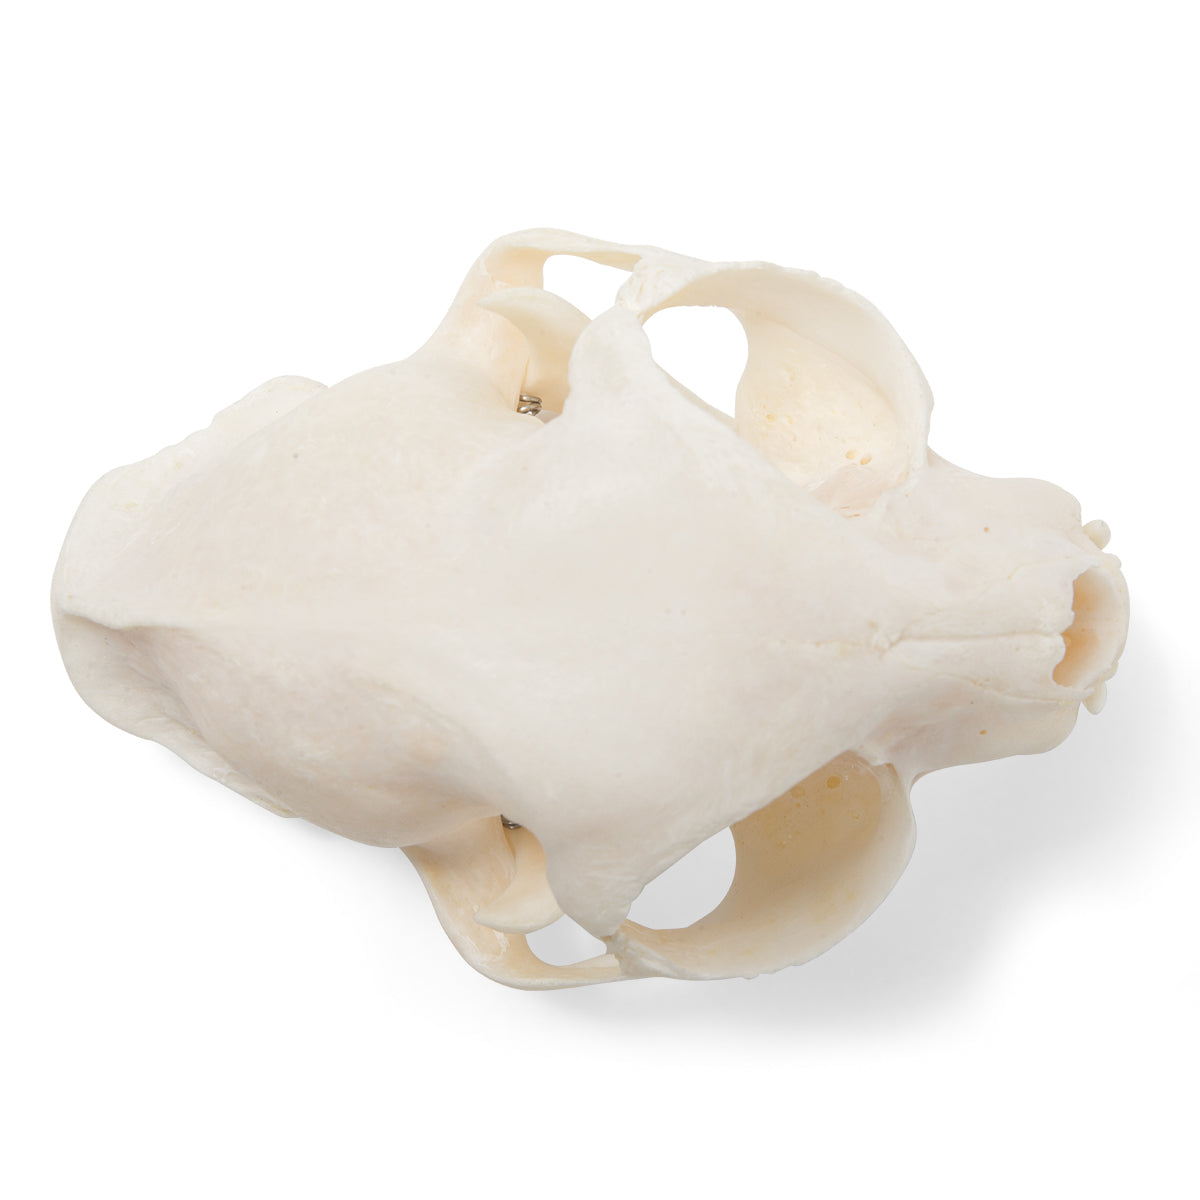 Real cat skull (Felis catus) with movable jaw